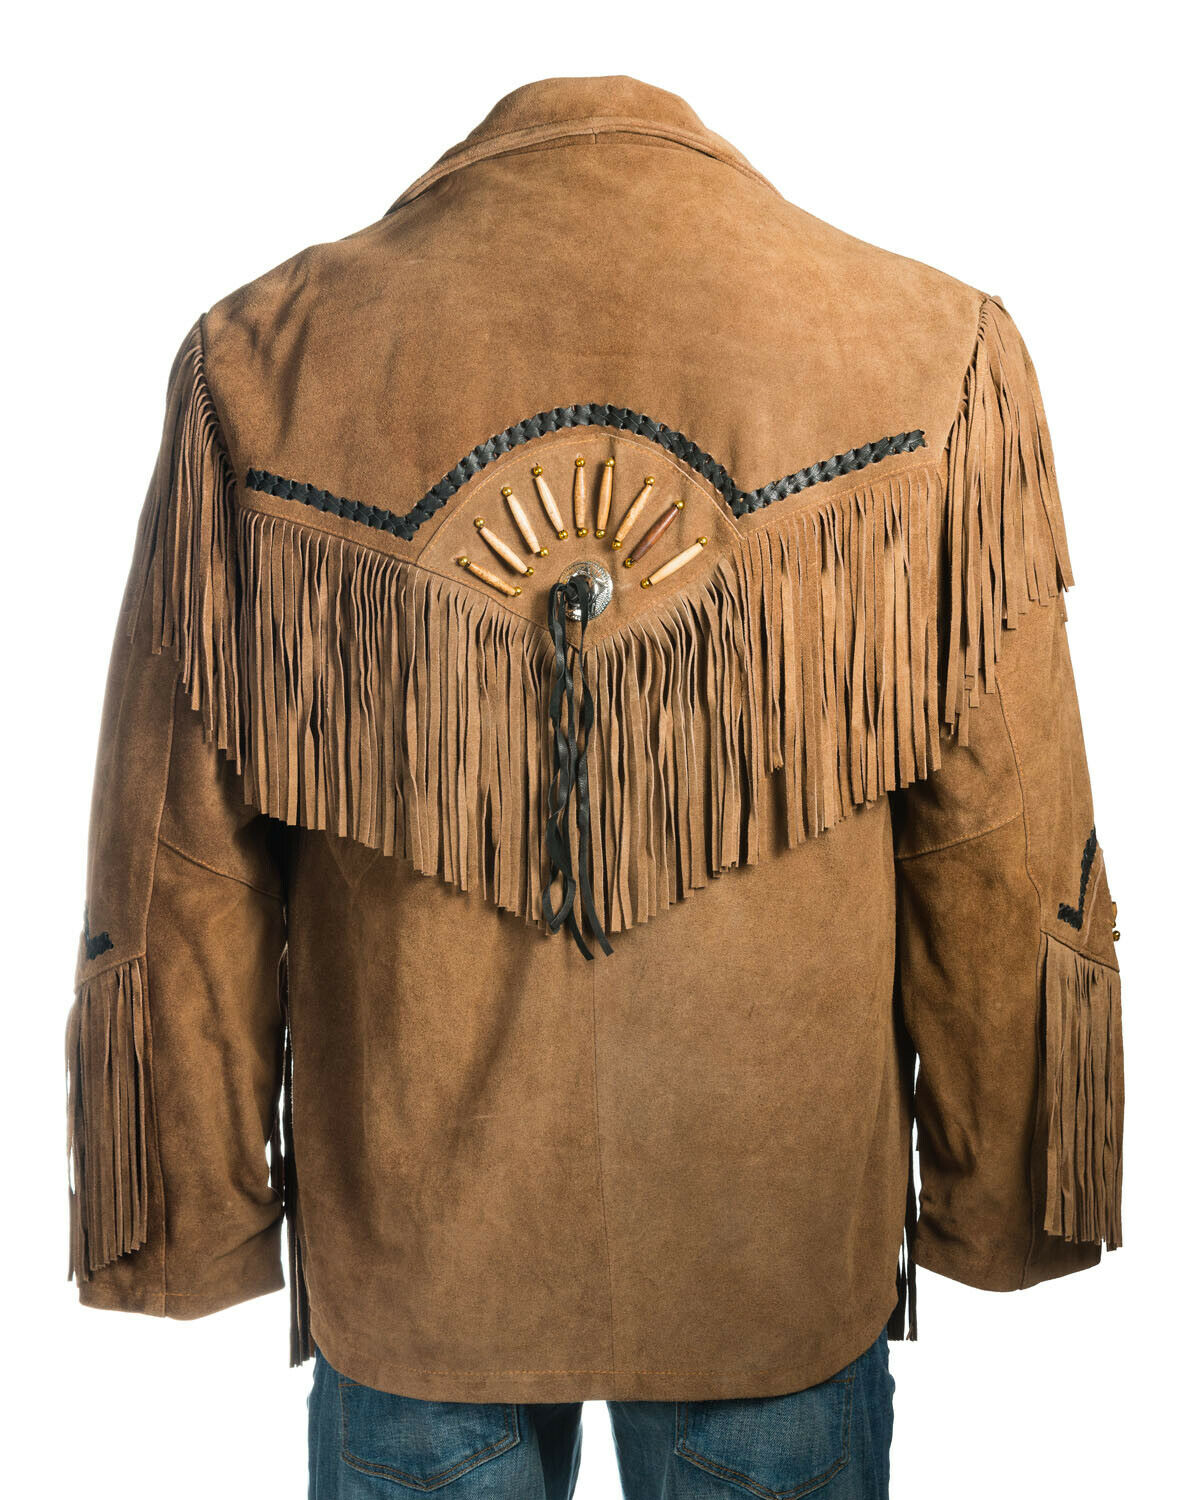 Men Suede Western Cowboy Leather Jacket With Fringes - Native American Style